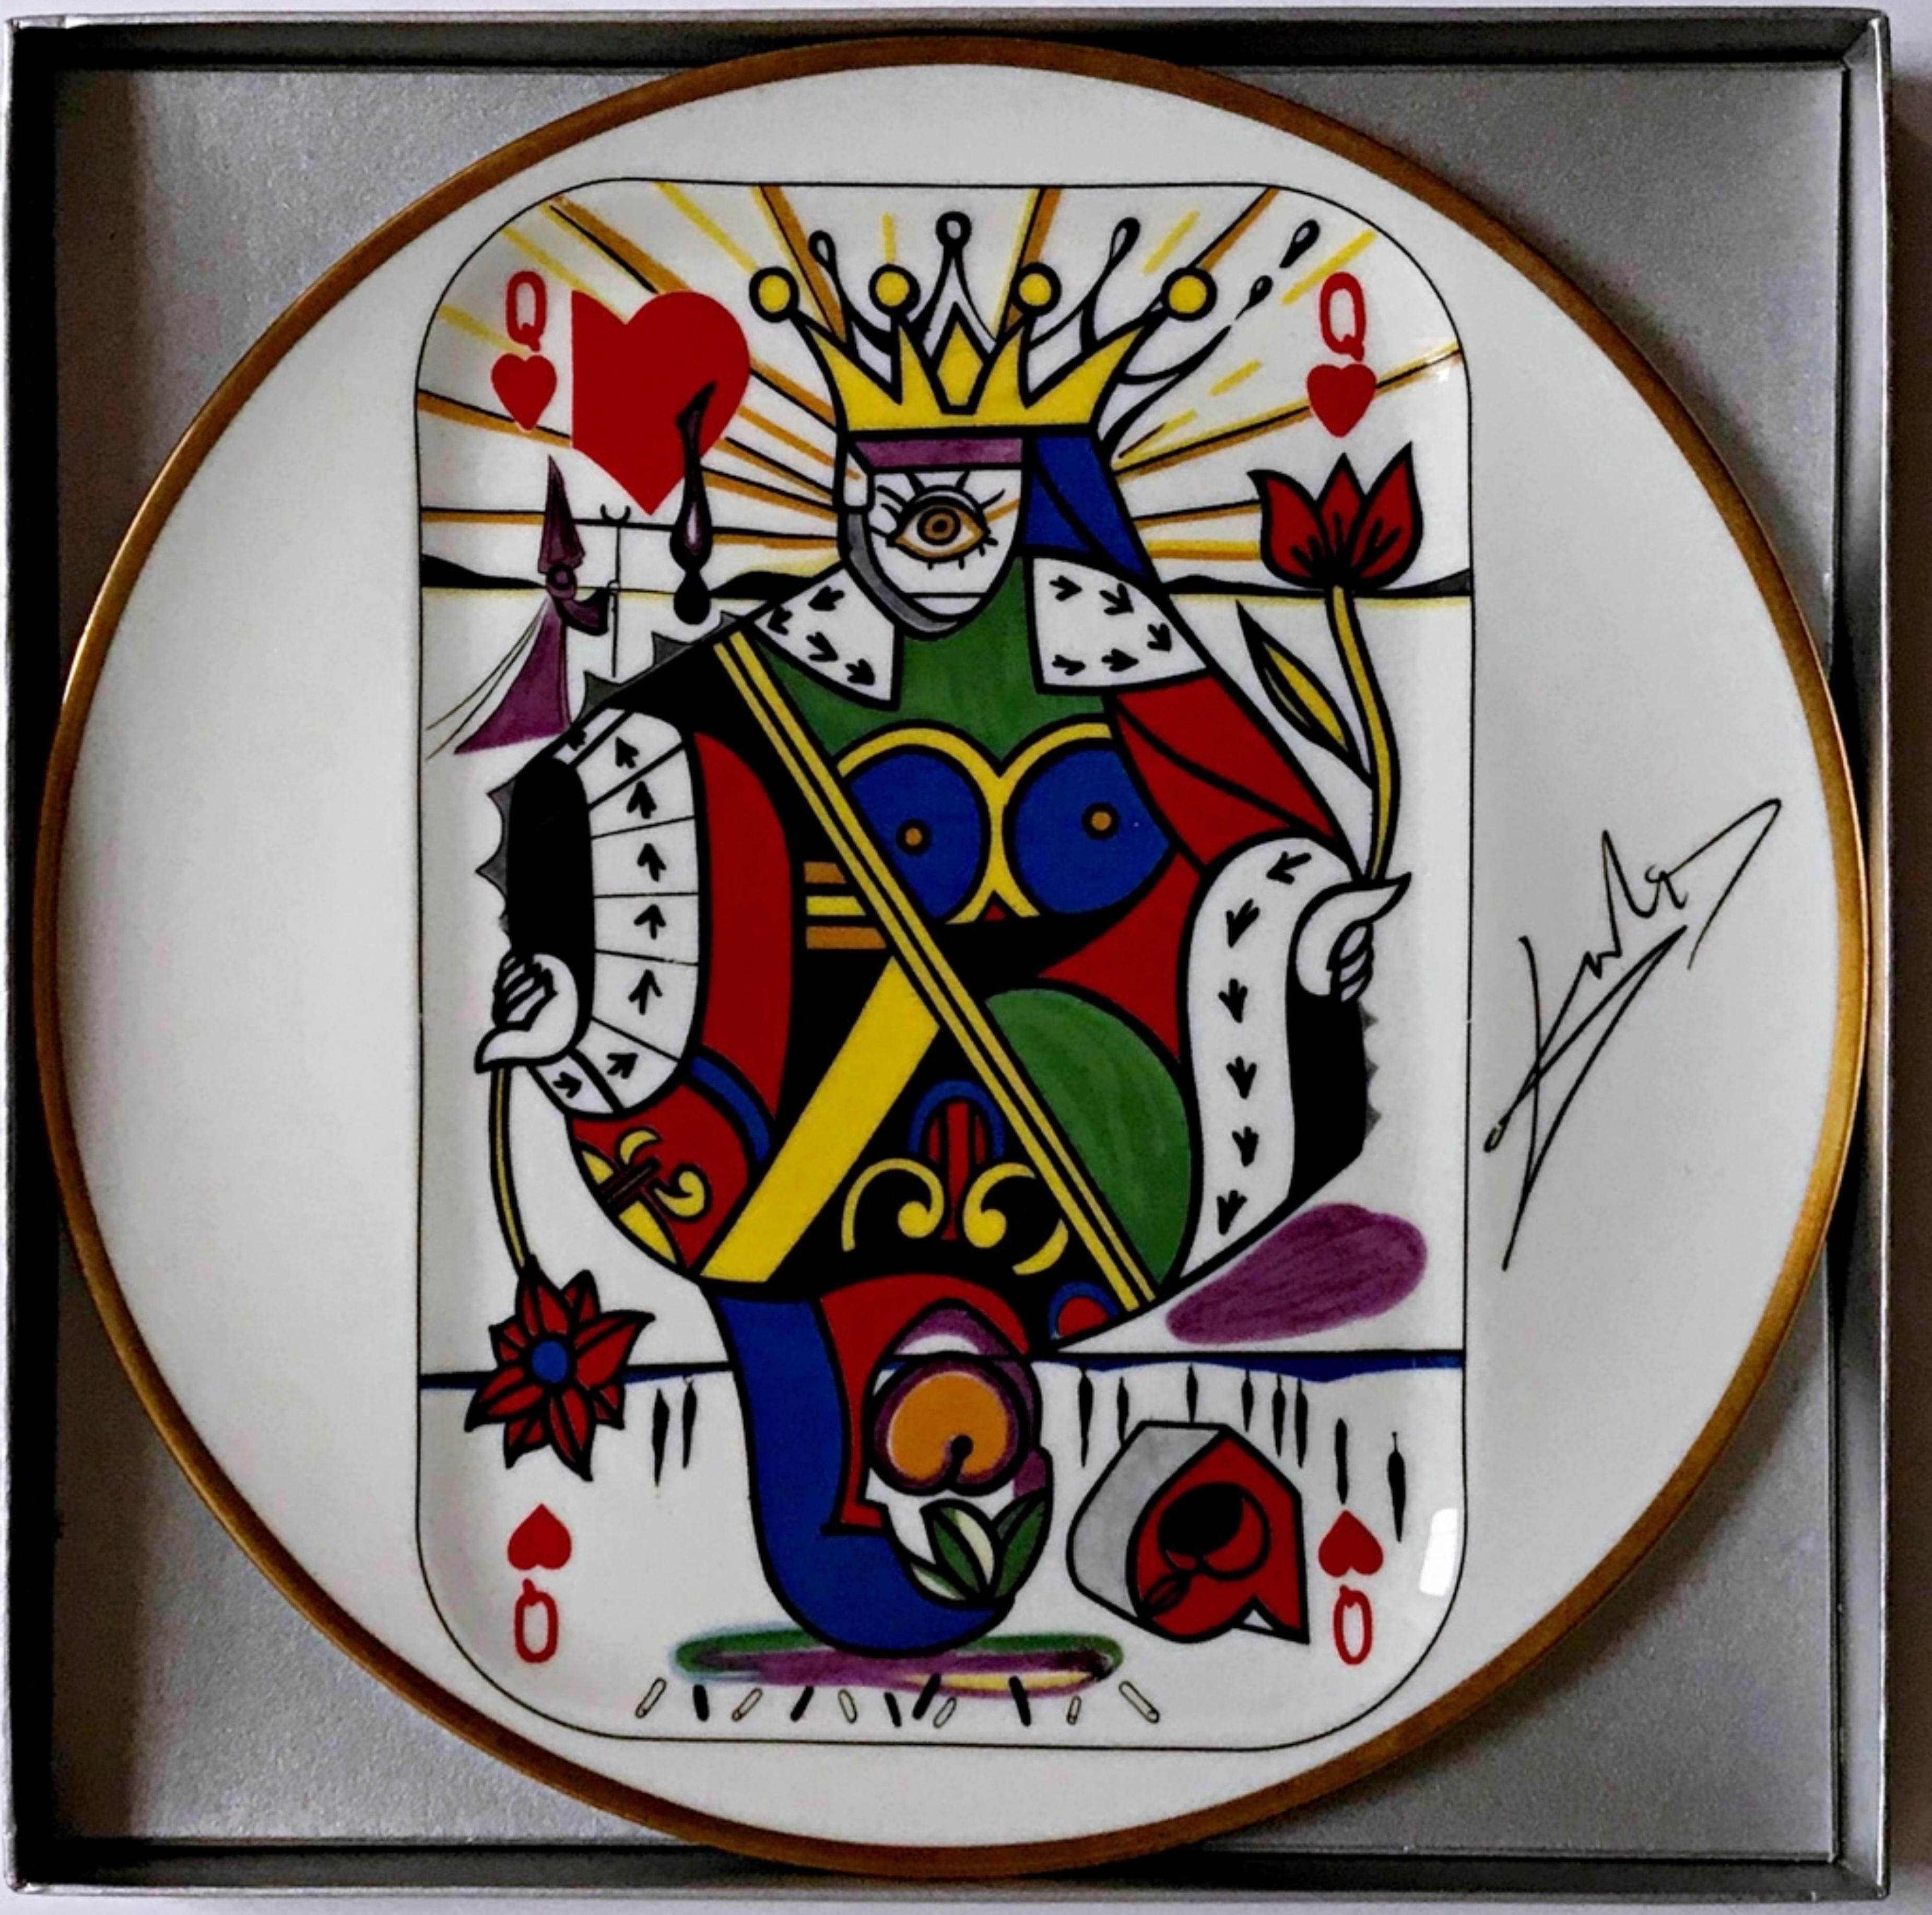 Queen of Hearts vintage French limited edition numbered porcelain ceramic plate  - Print by Salvador Dalí